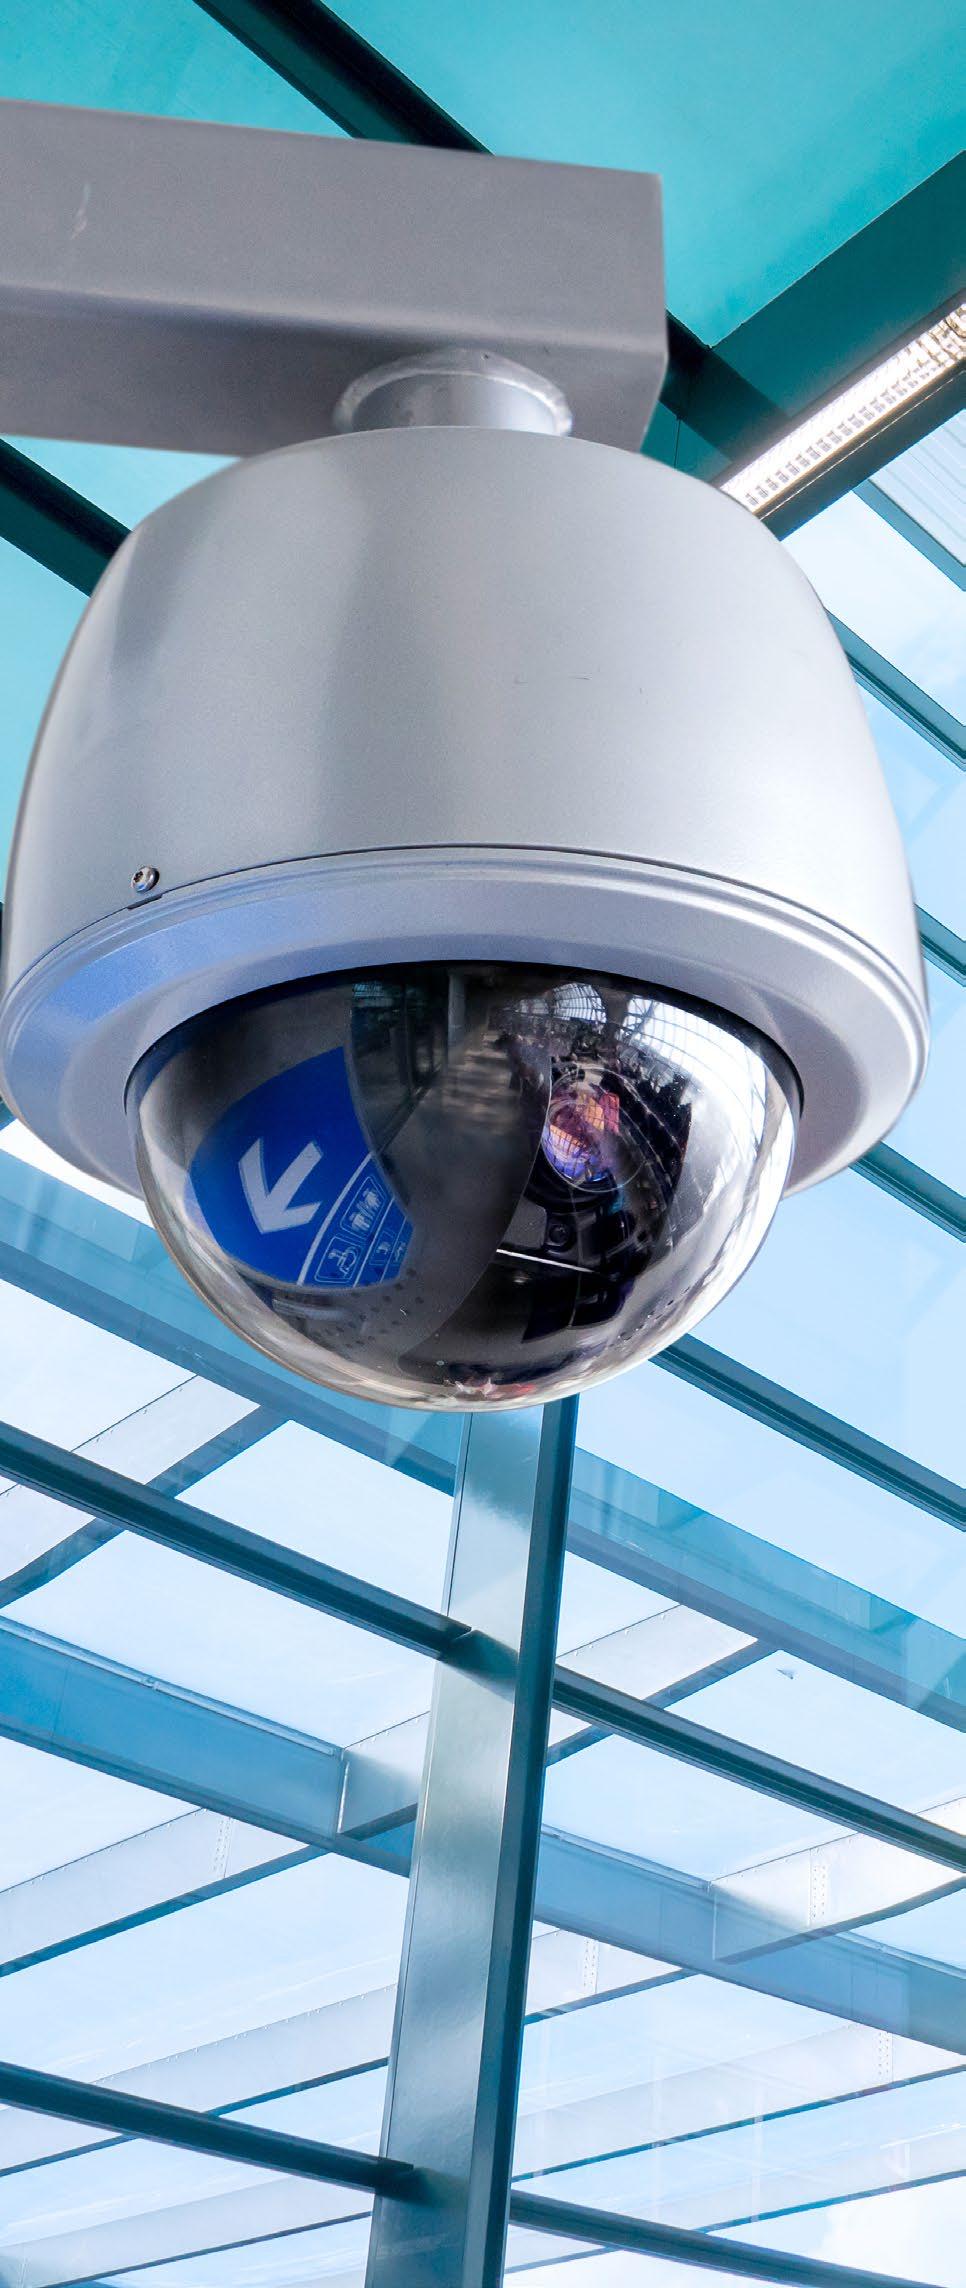 What are the advantages of a CCTV system?